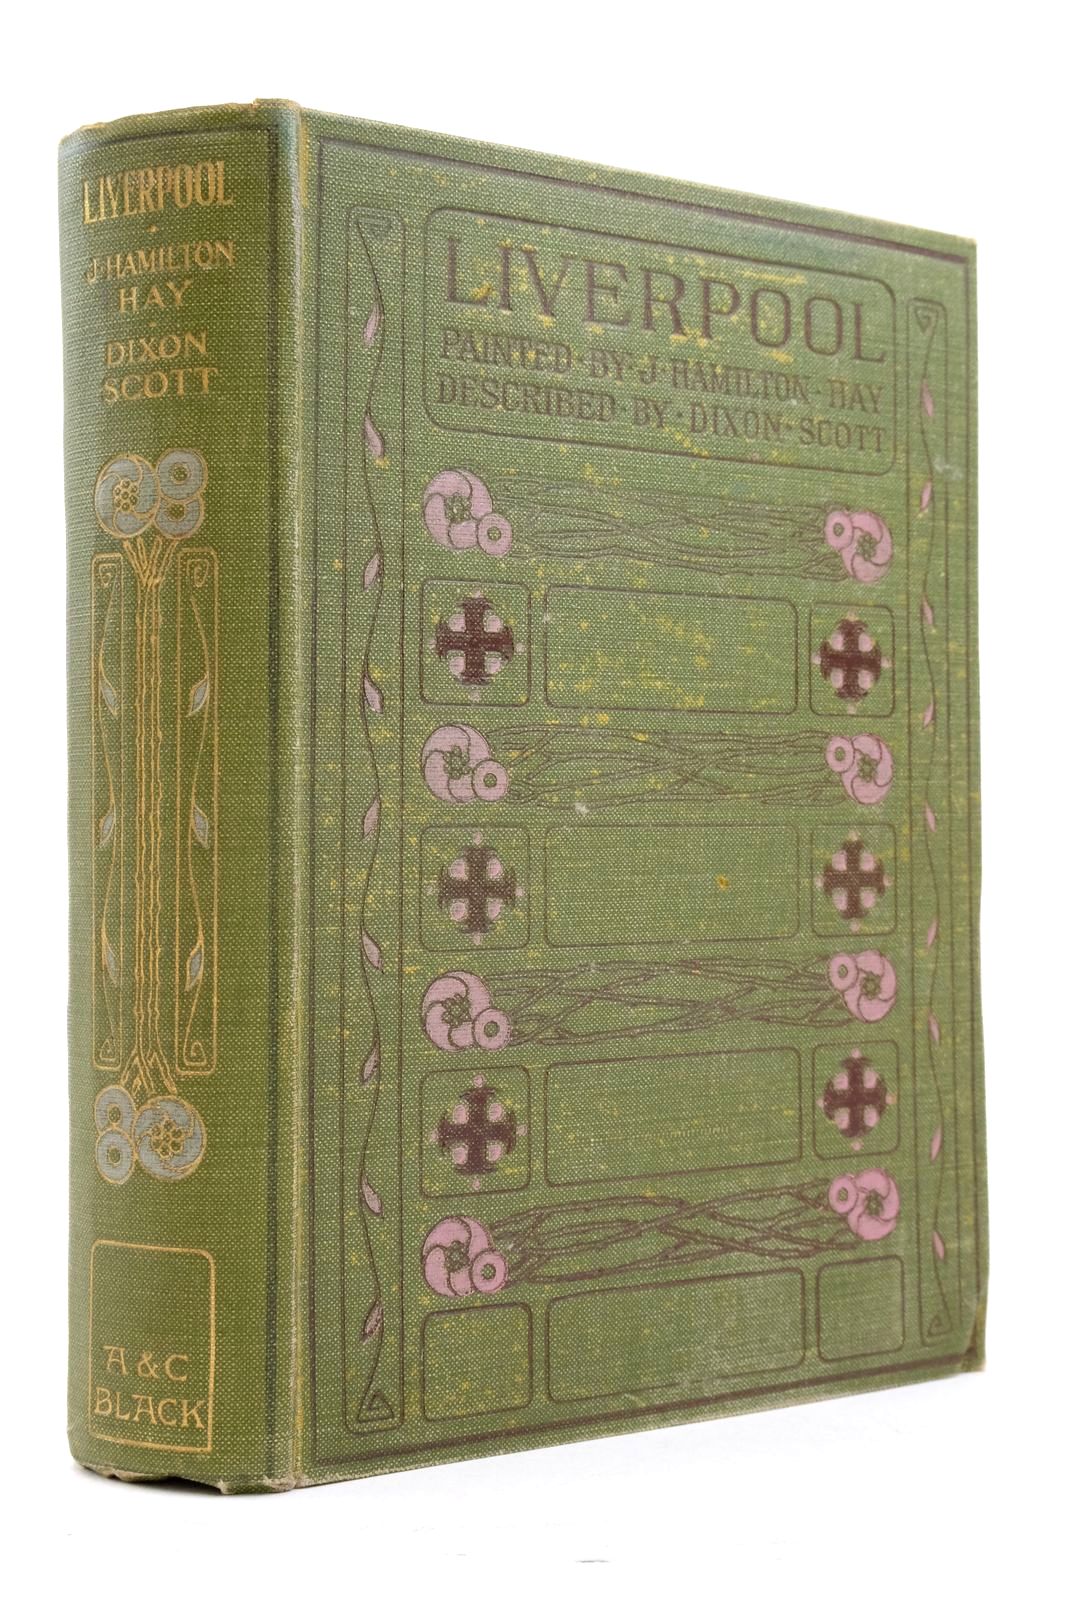 Photo of LIVERPOOL written by Scott, Dixon illustrated by Hay, J. Hamilton published by Adam &amp; Charles Black (STOCK CODE: 2136978)  for sale by Stella & Rose's Books